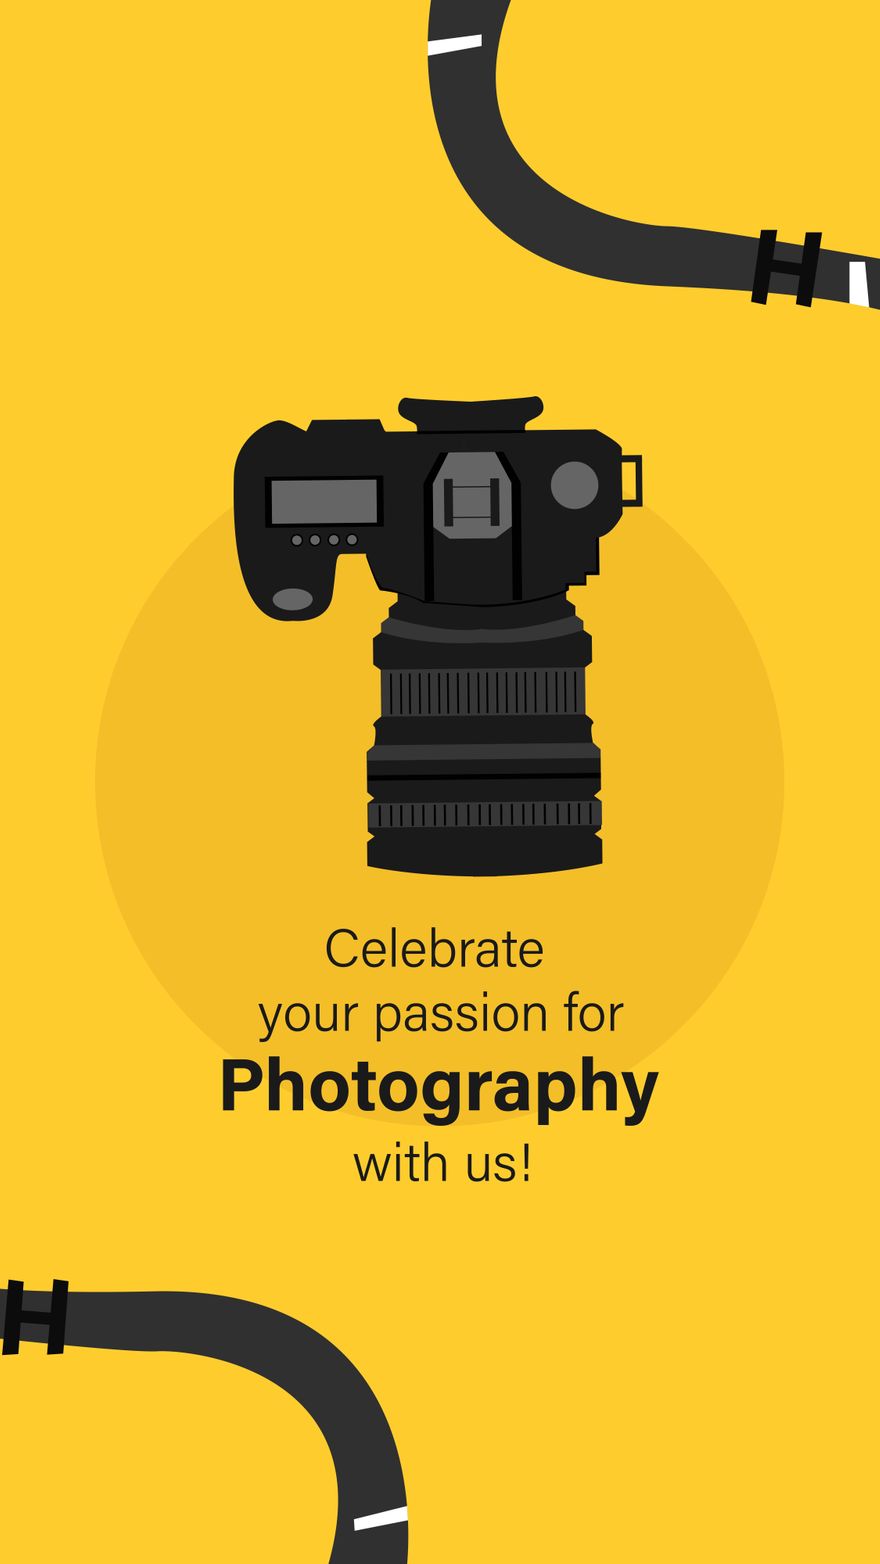 Free World Photography Day Invitation Background in PDF, Illustrator, PSD, EPS, SVG, JPG, PNG